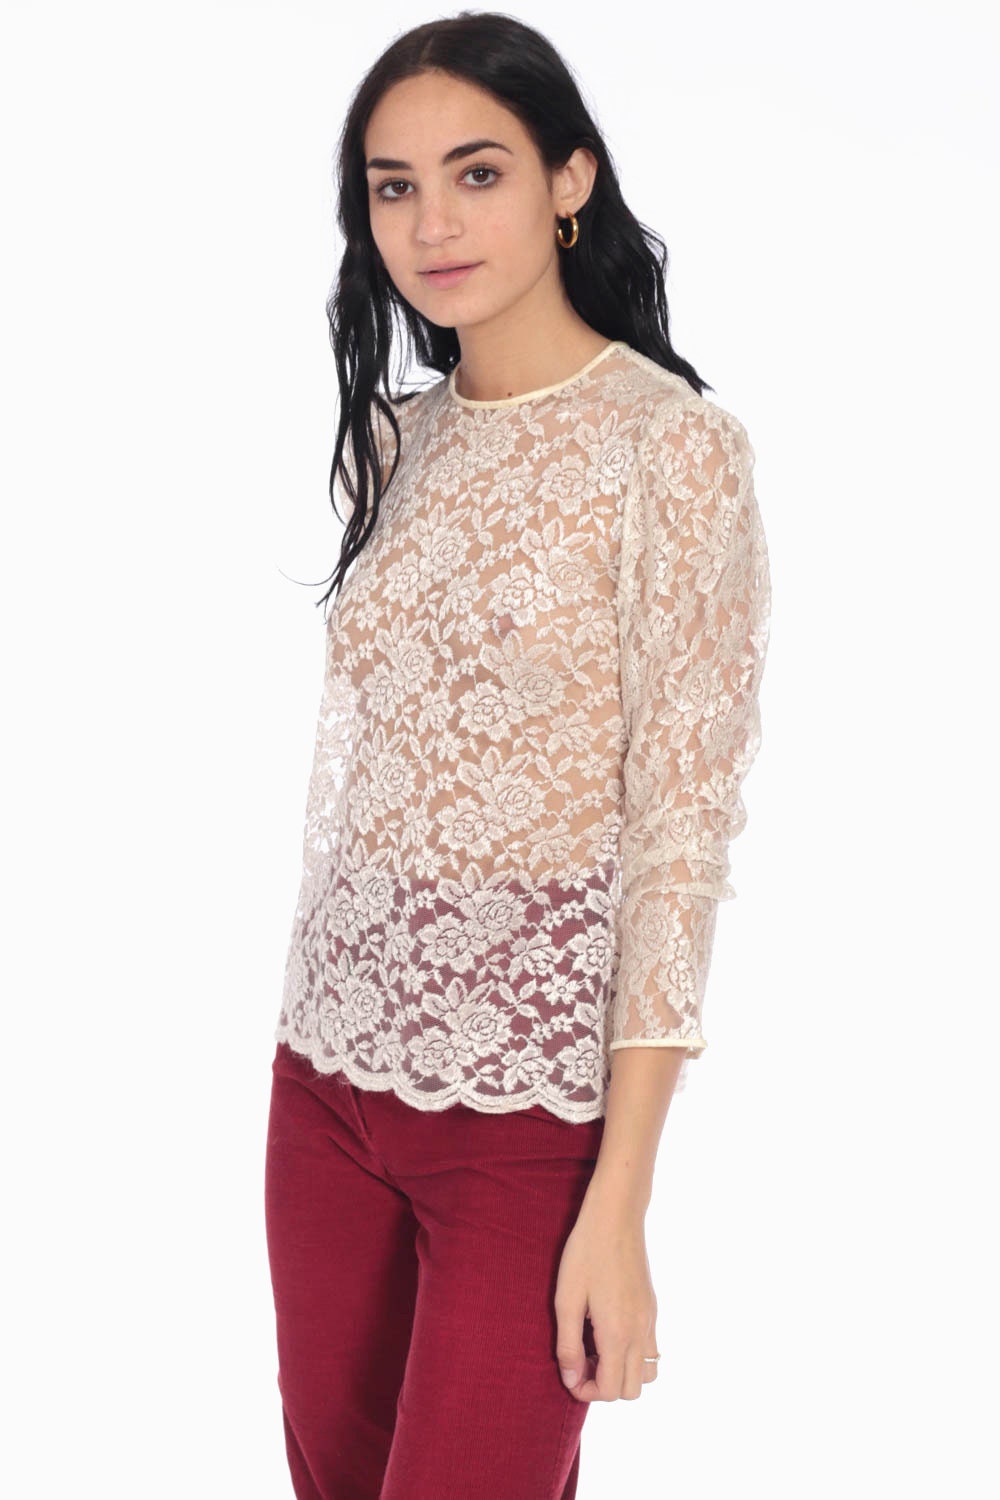  Sheer  Lace Blouse  PUFF SLEEVE Floral Ivory Lace Shirt 